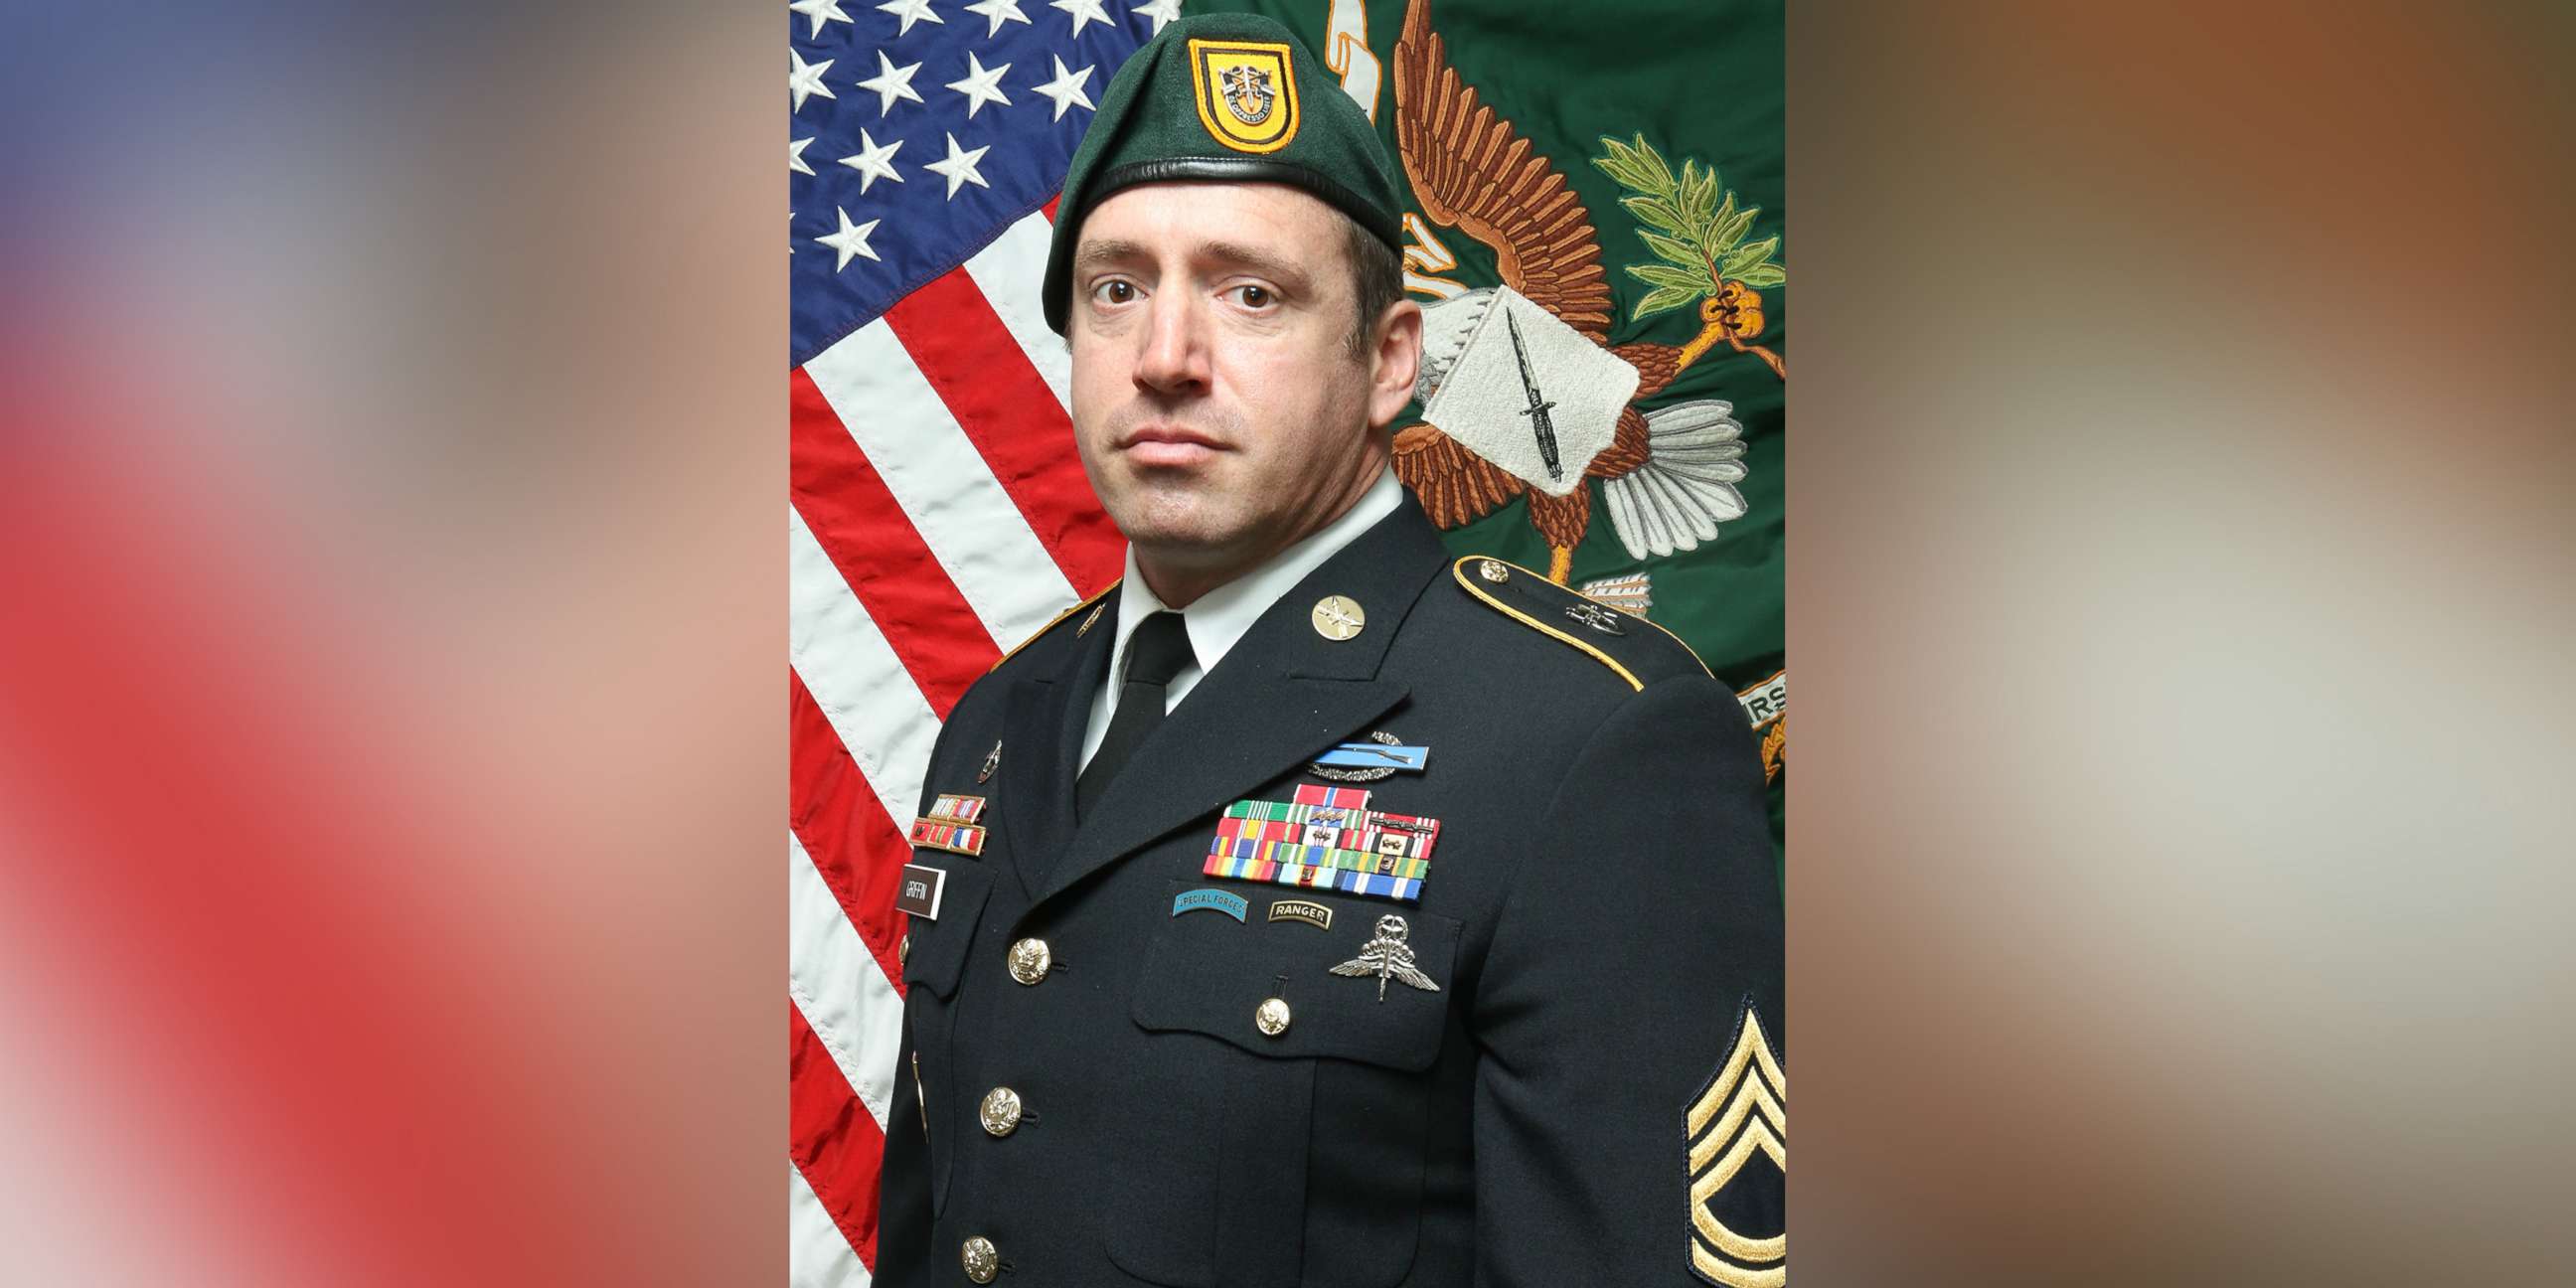 PHOTO: Sgt. 1st Class Jeremy W. Griffin, 40, from Greenbrier, Tennessee, was killed in action Sept. 16, 2019, by small arms fire when his unit was engaged in combat operations in Wardak Province, Afghanistan.